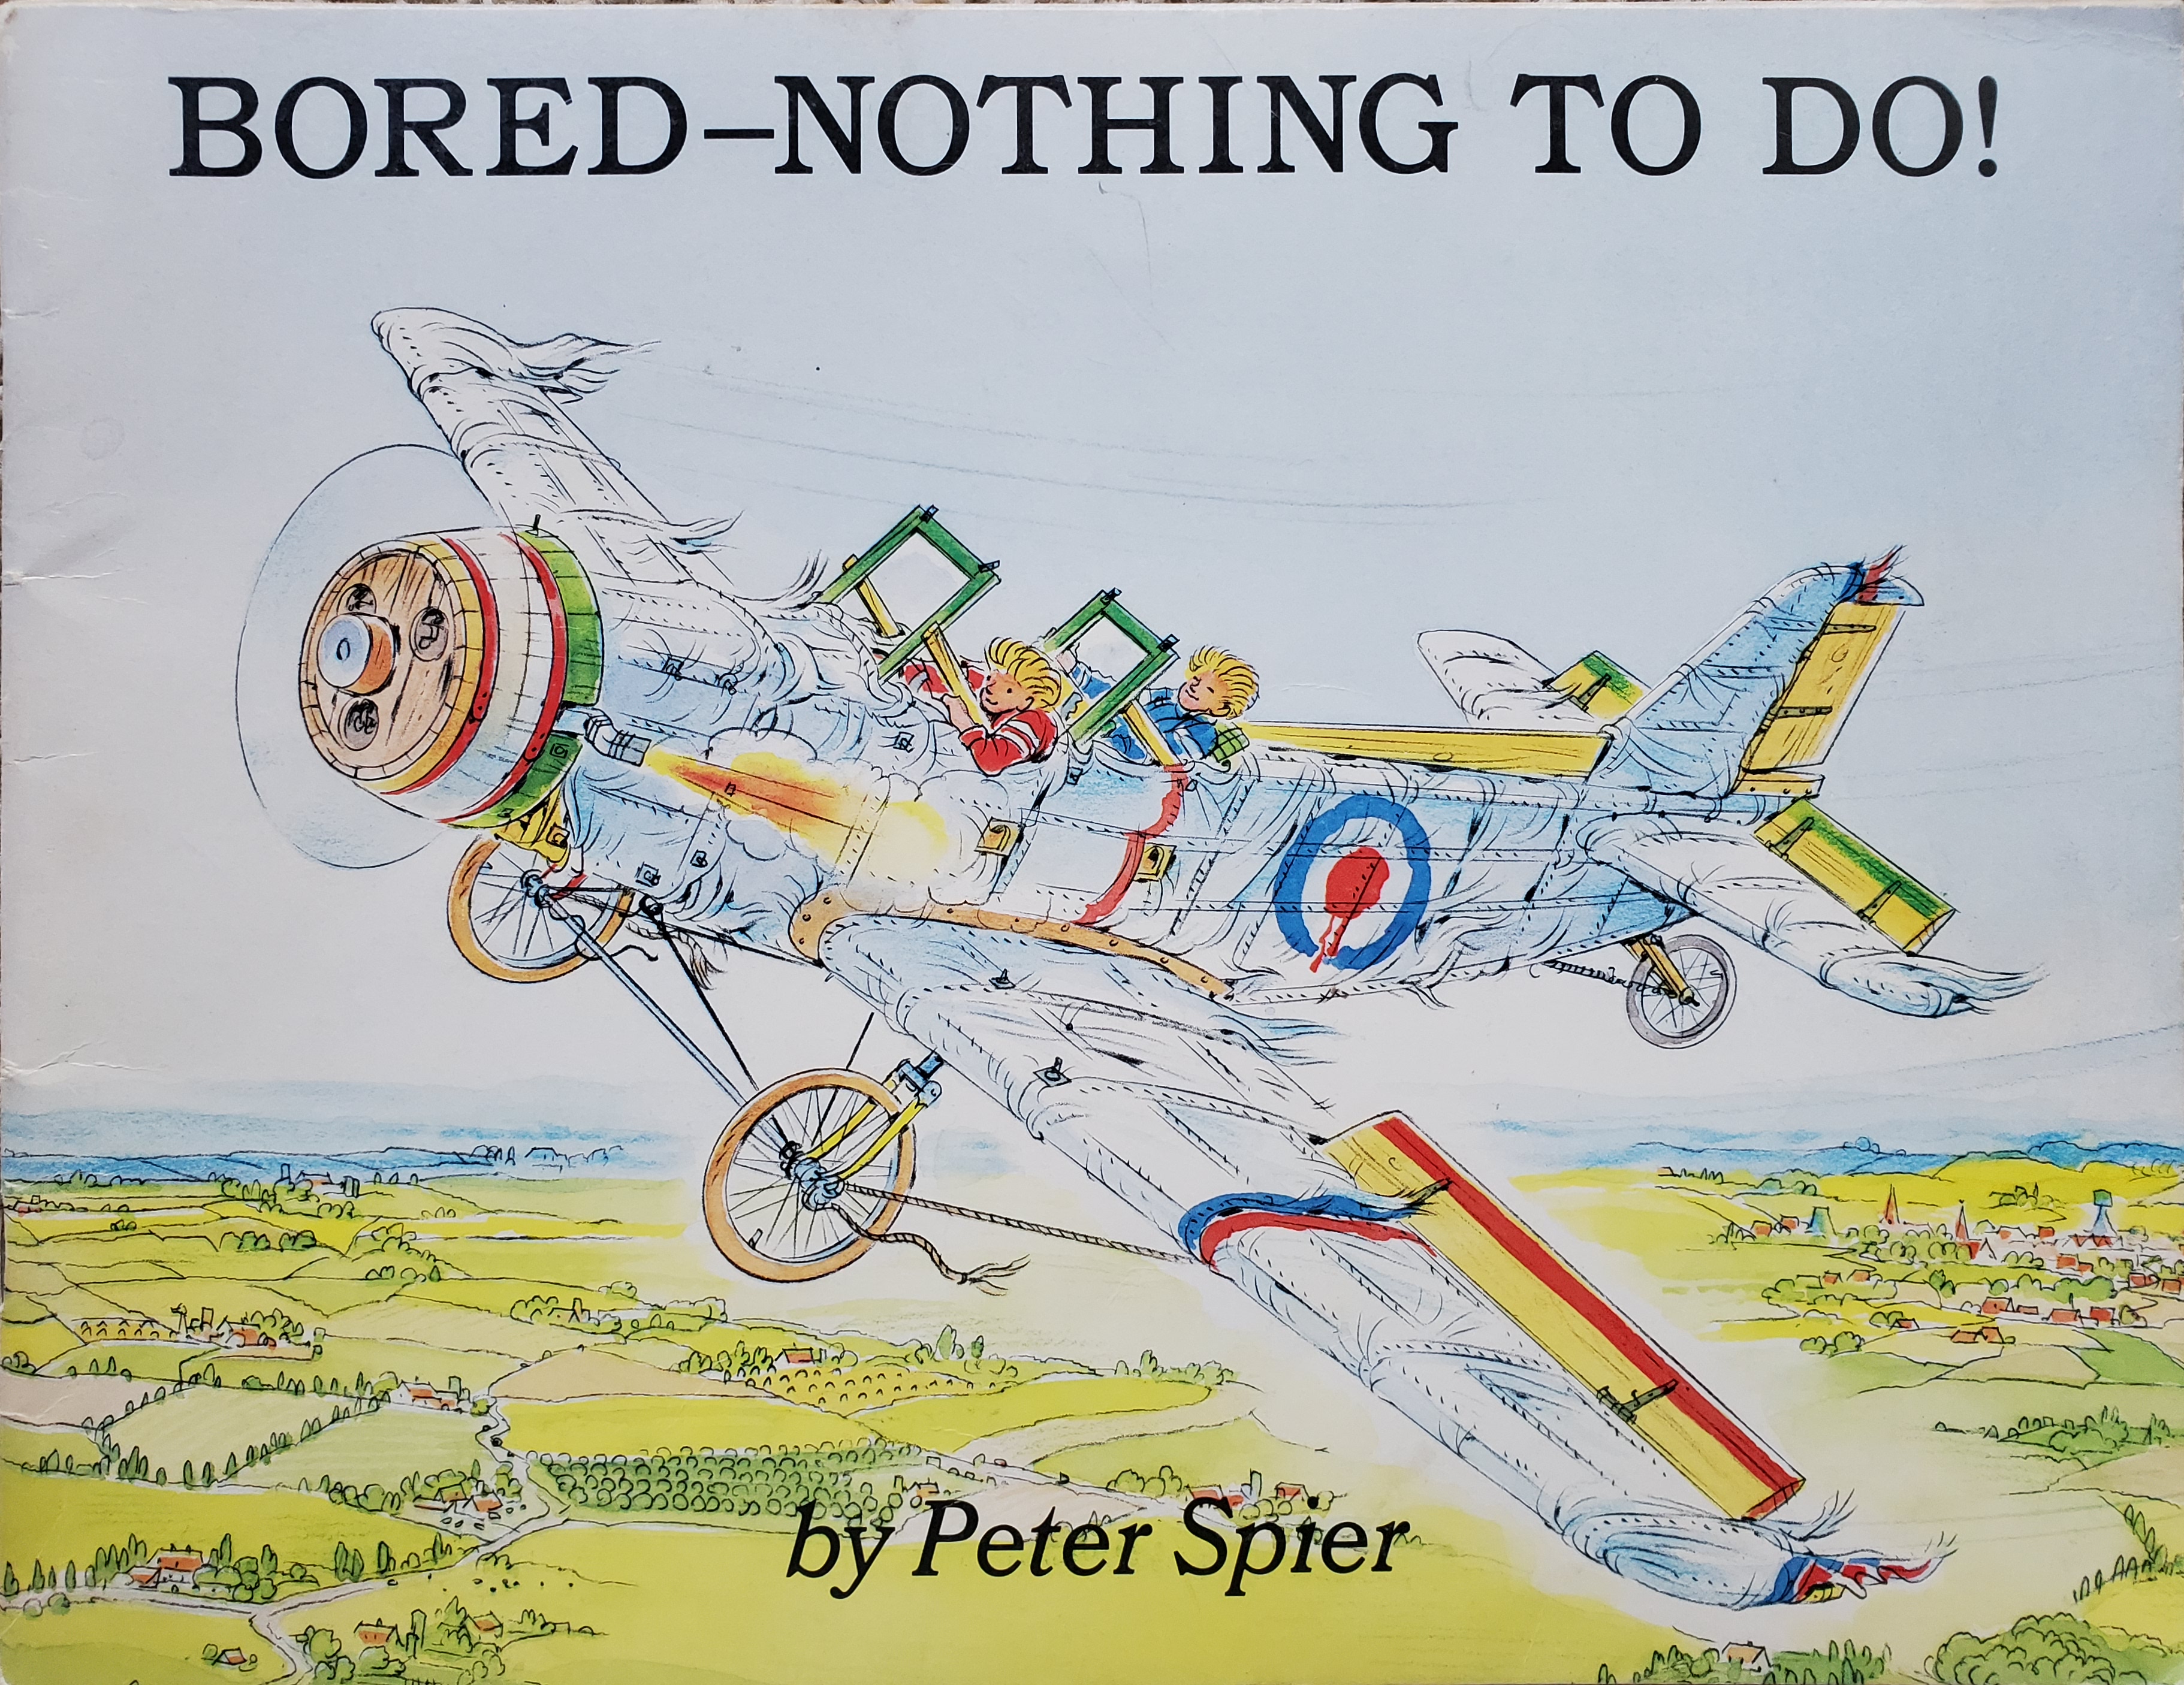 Bored-Nothing to Do! by Peter Spier